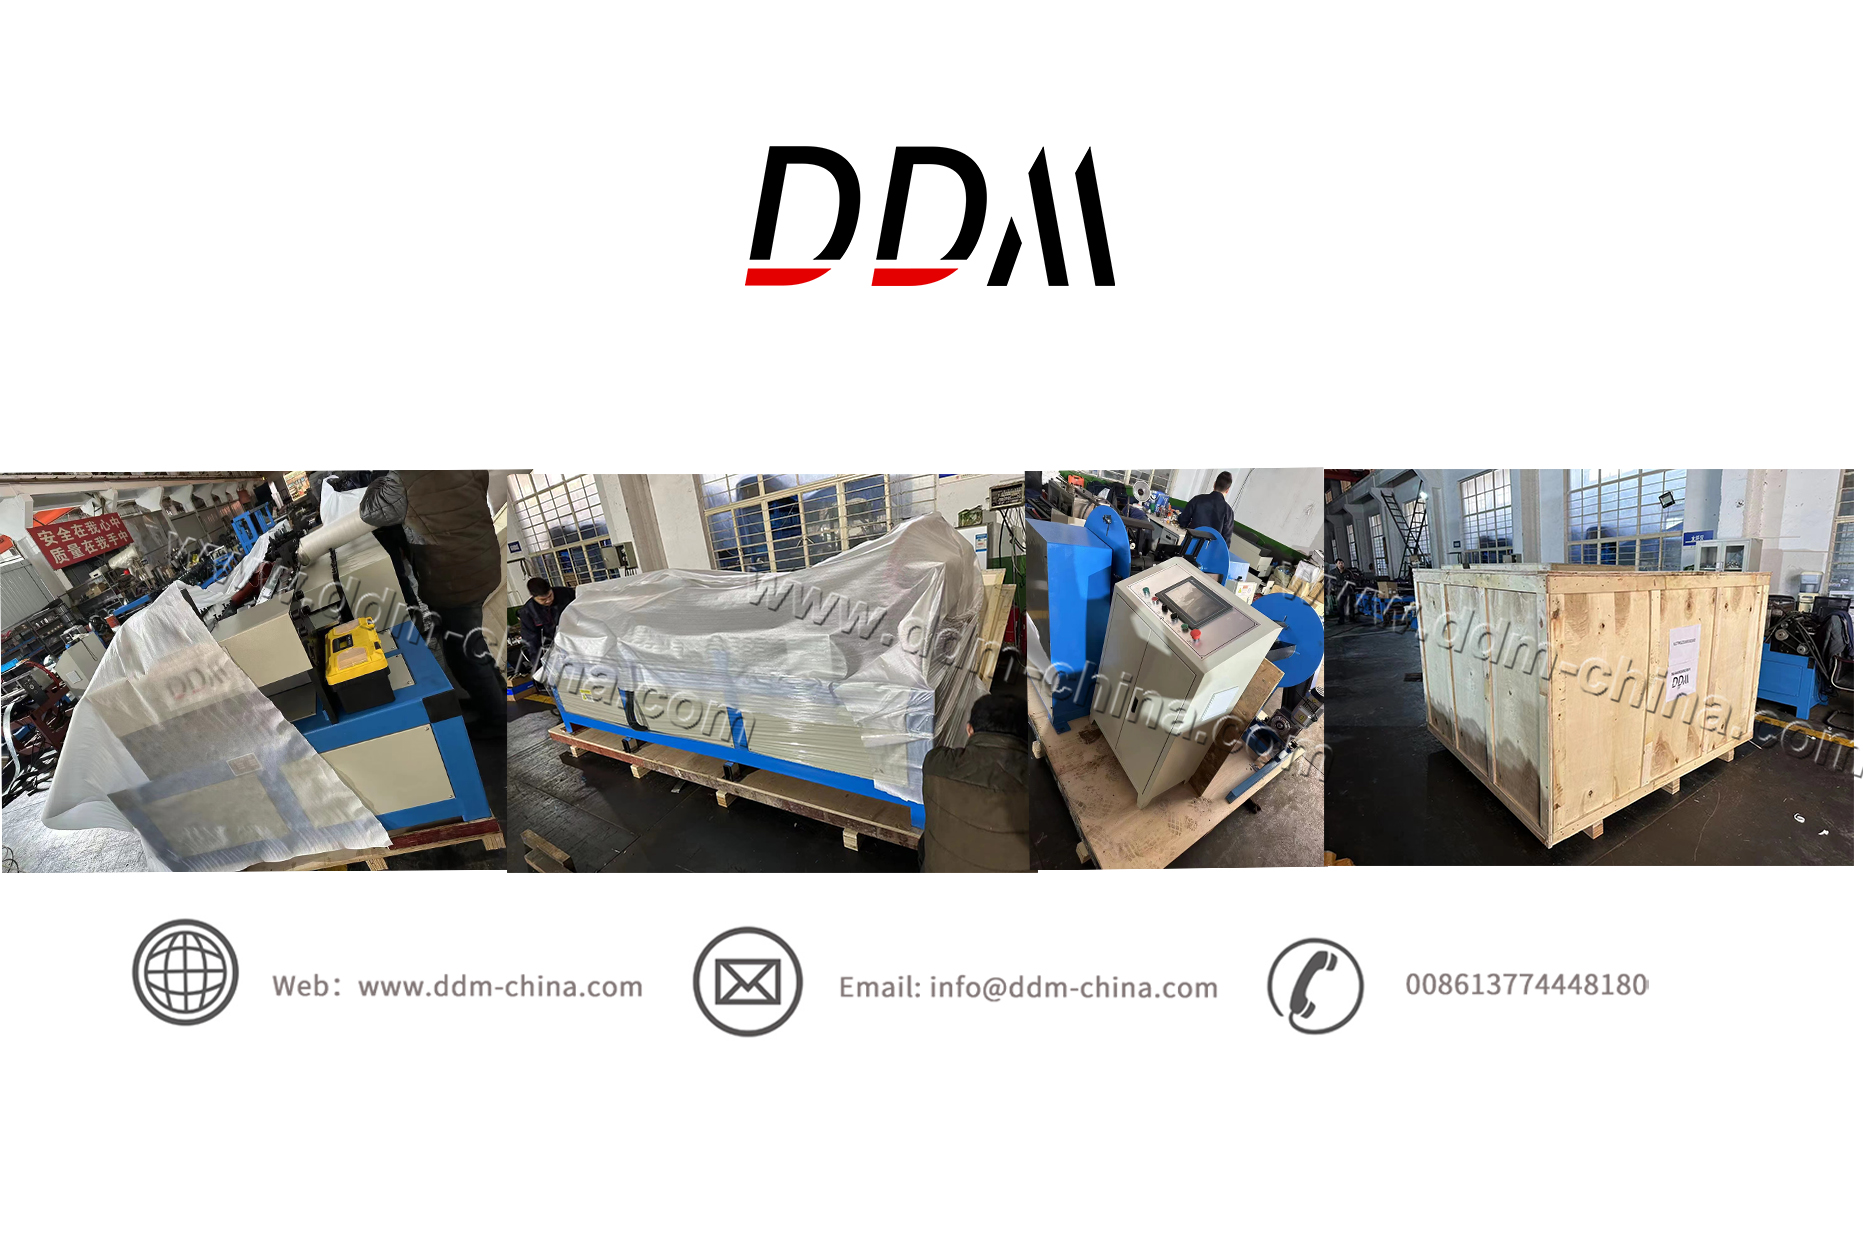 DDM -Flexible duct connector forming machine delivered to Russia 